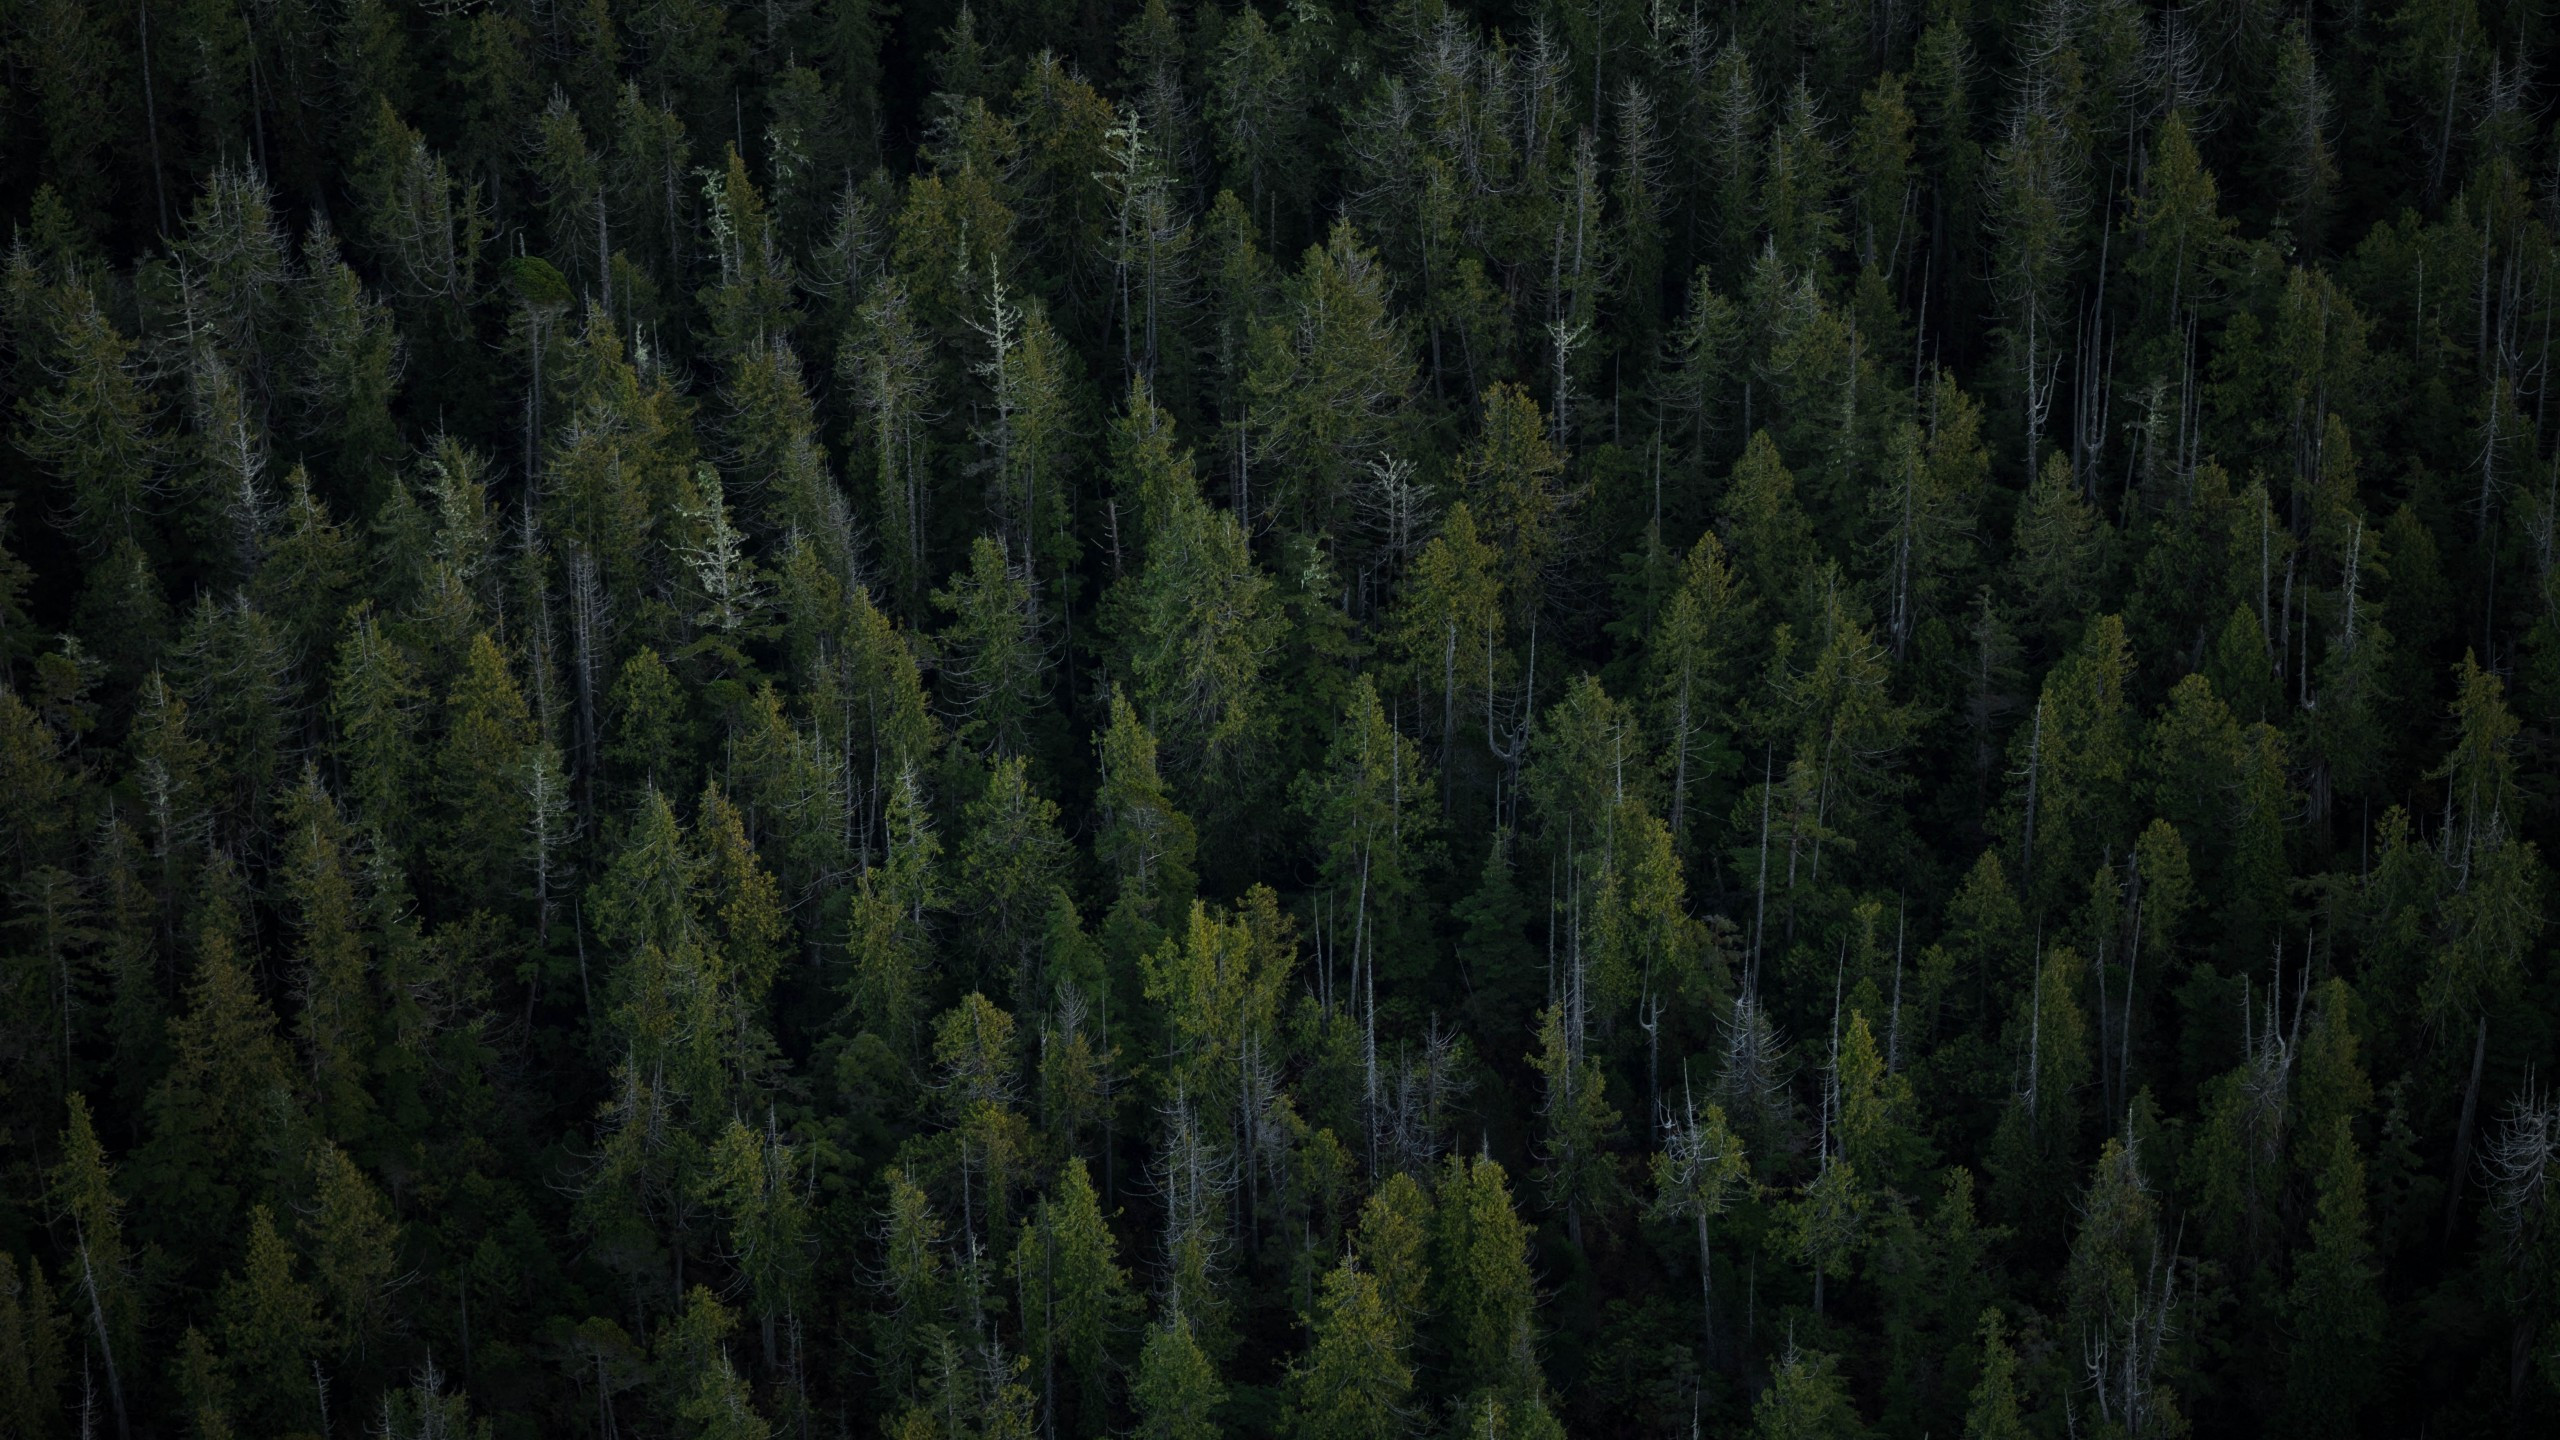 Download 2560x1440 Trees, Top View, Forest Wallpaper for iMac 27 inch